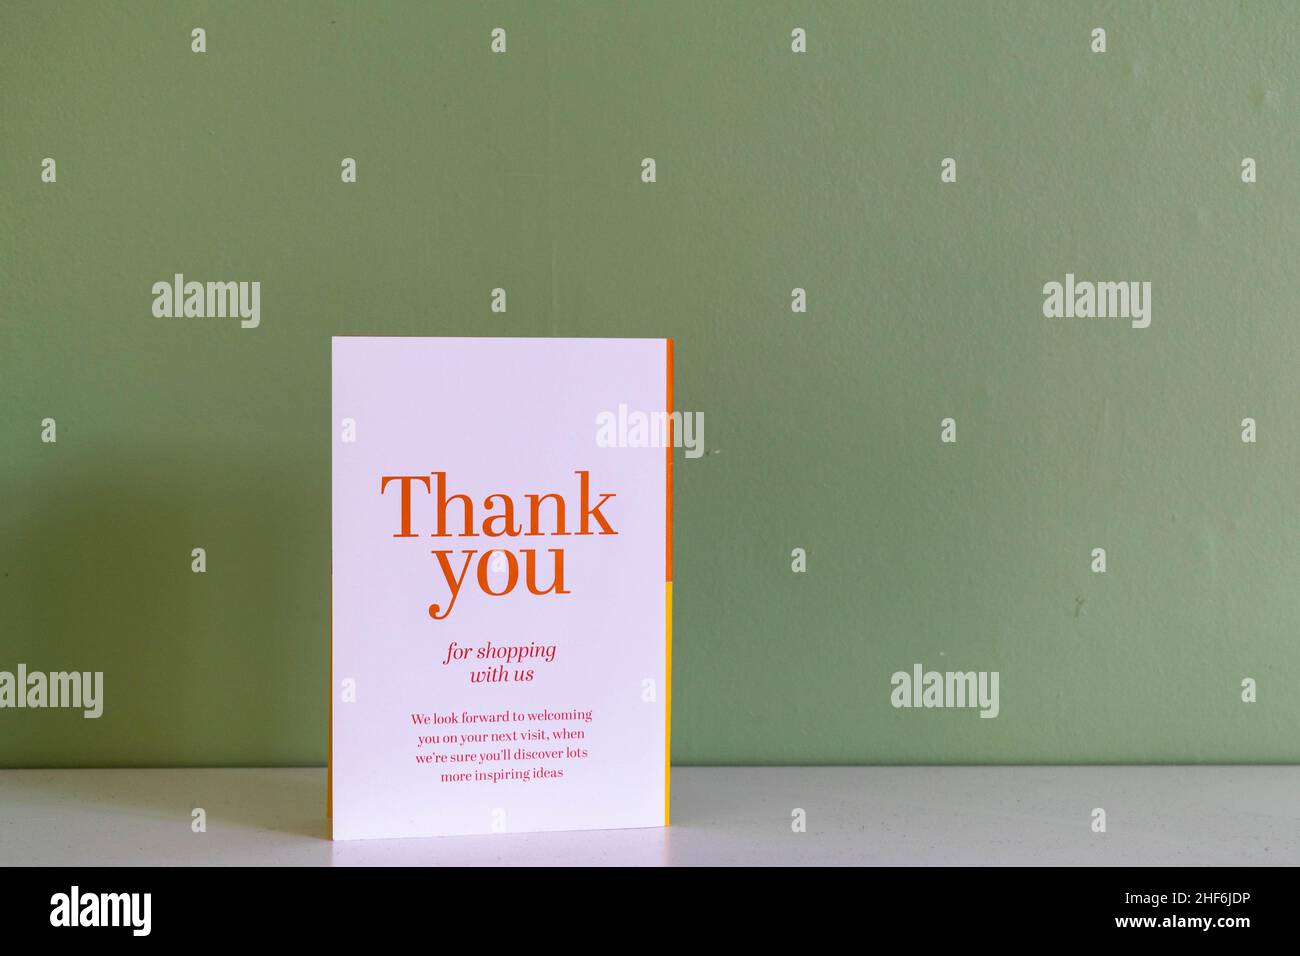 Thank you for being a loyal customer card from a big business to entice customers to return to their business instead of shopping with a competitor. Stock Photo